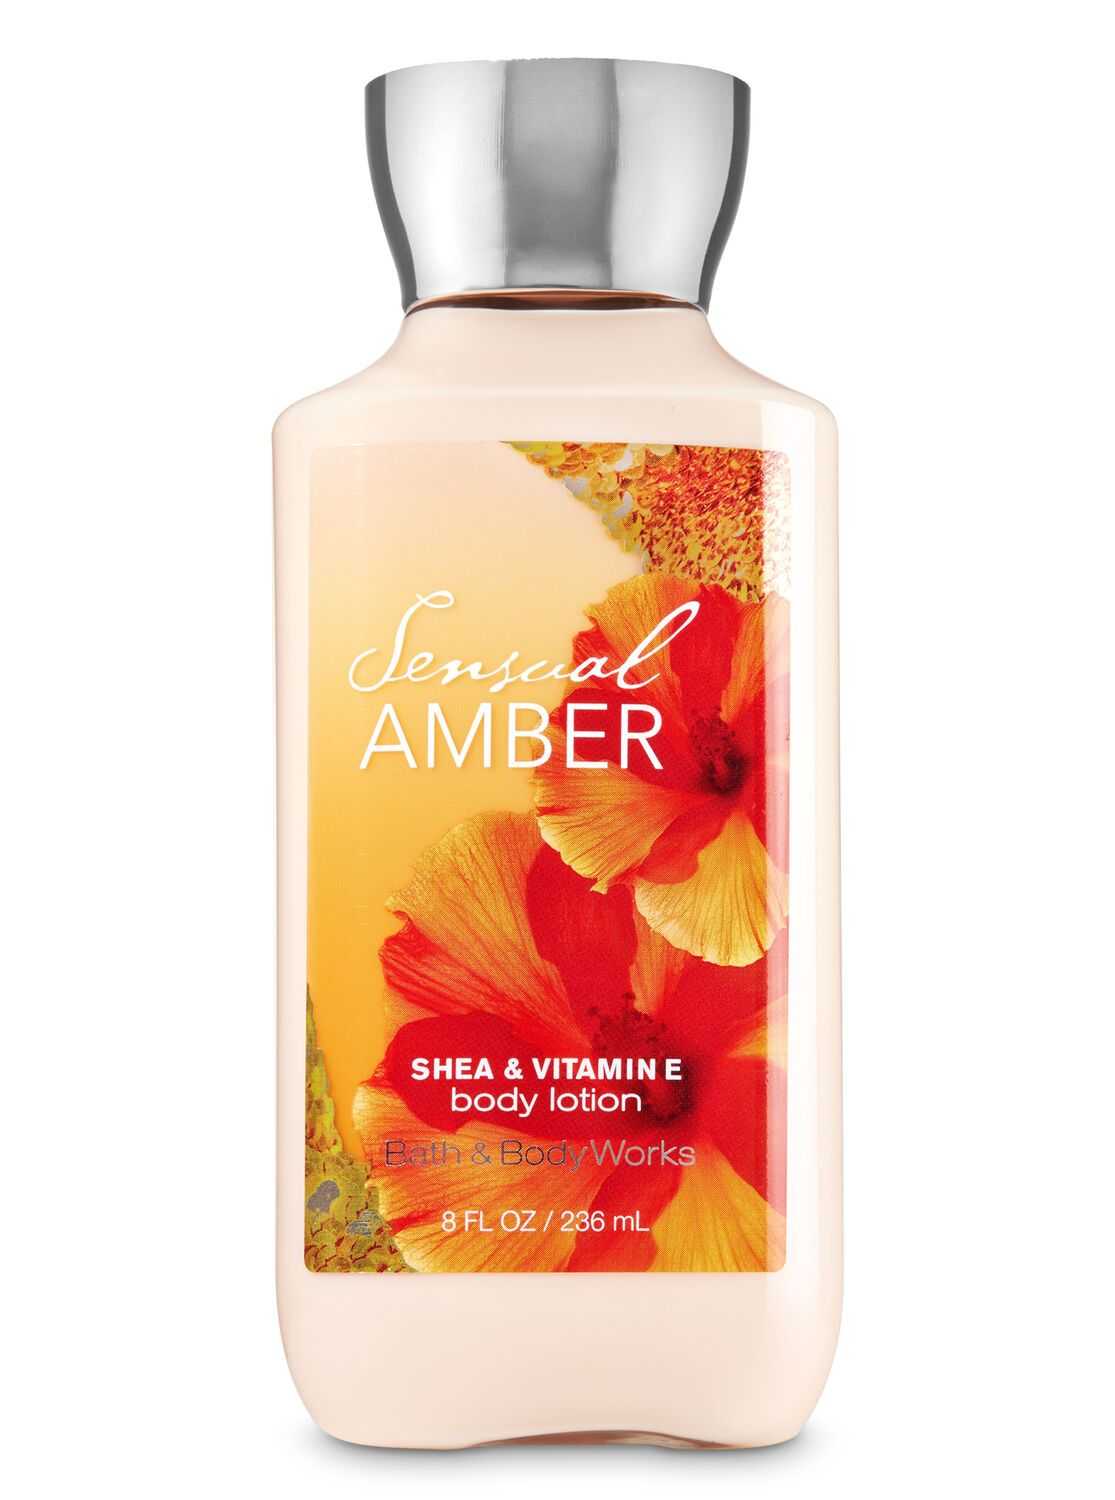 Bath & Body Works- Sensual AmberLotion, 236 ml by Sidra - BBW priced at #price# | Bagallery Deals